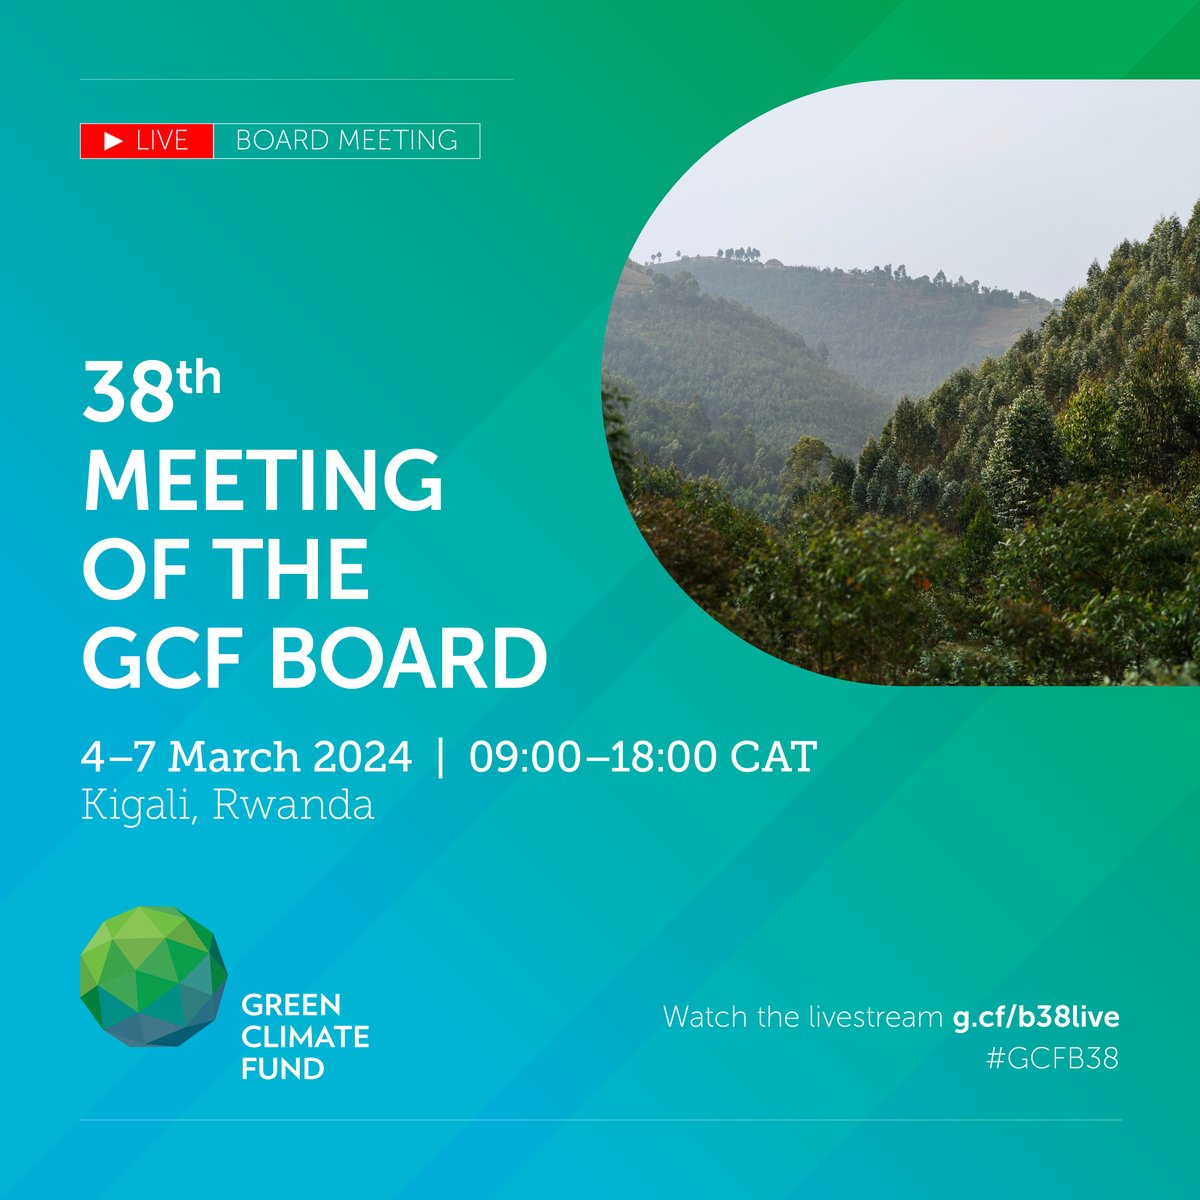 Day 1 of GCF Board meeting #GCFB38 starts at 14:00 CAT / 21:00 KST today. Catch it live here: g.cf/b38live